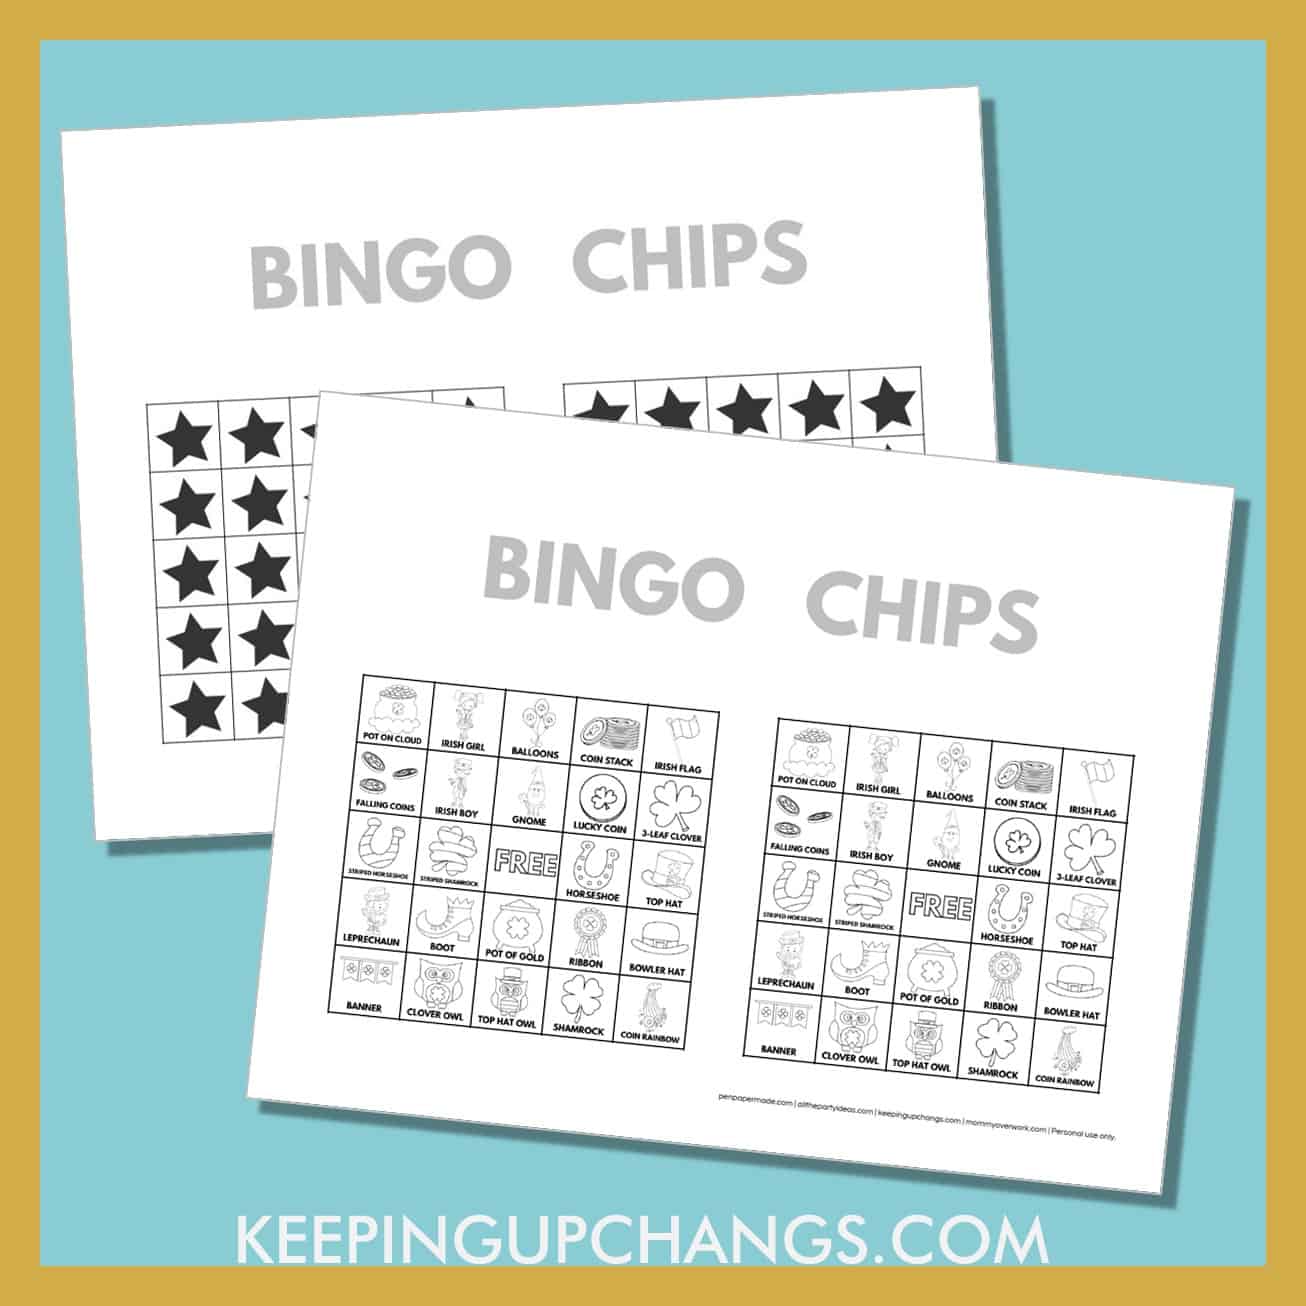 free st patrick's day bingo card 5x5 black white coloring game chips, tokens, markers.